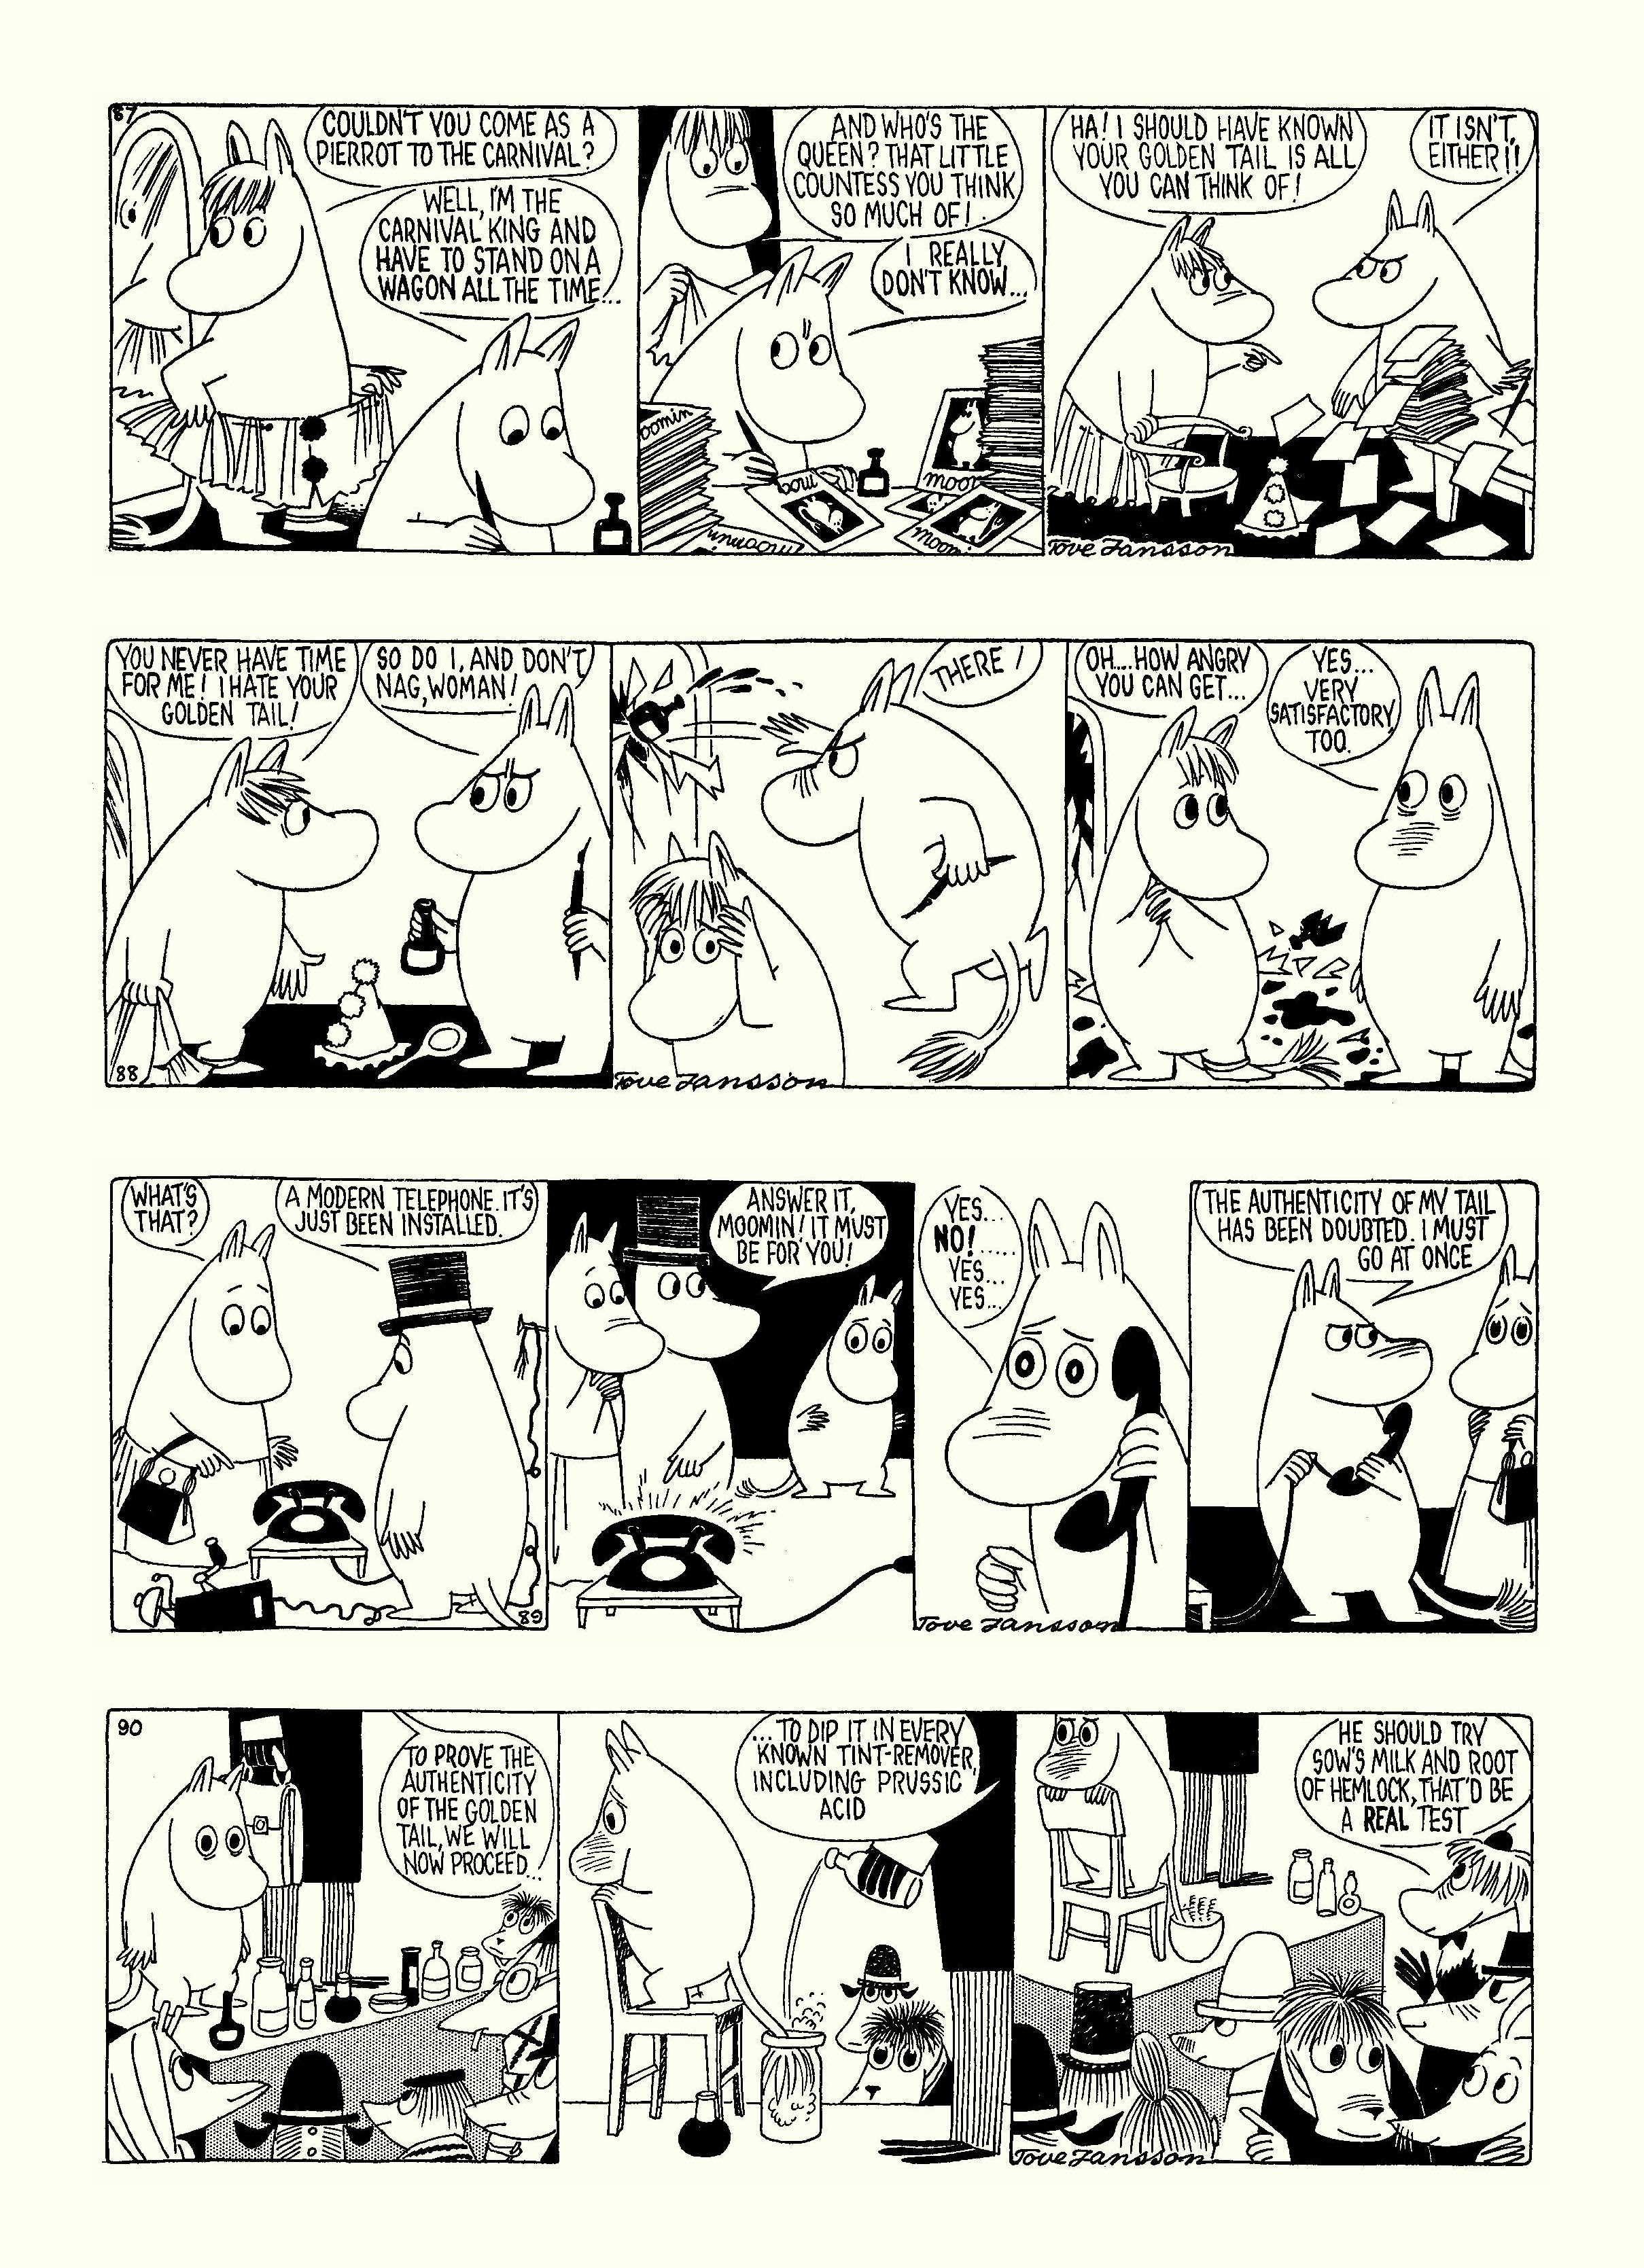 Read online Moomin: The Complete Tove Jansson Comic Strip comic -  Issue # TPB 4 - 101